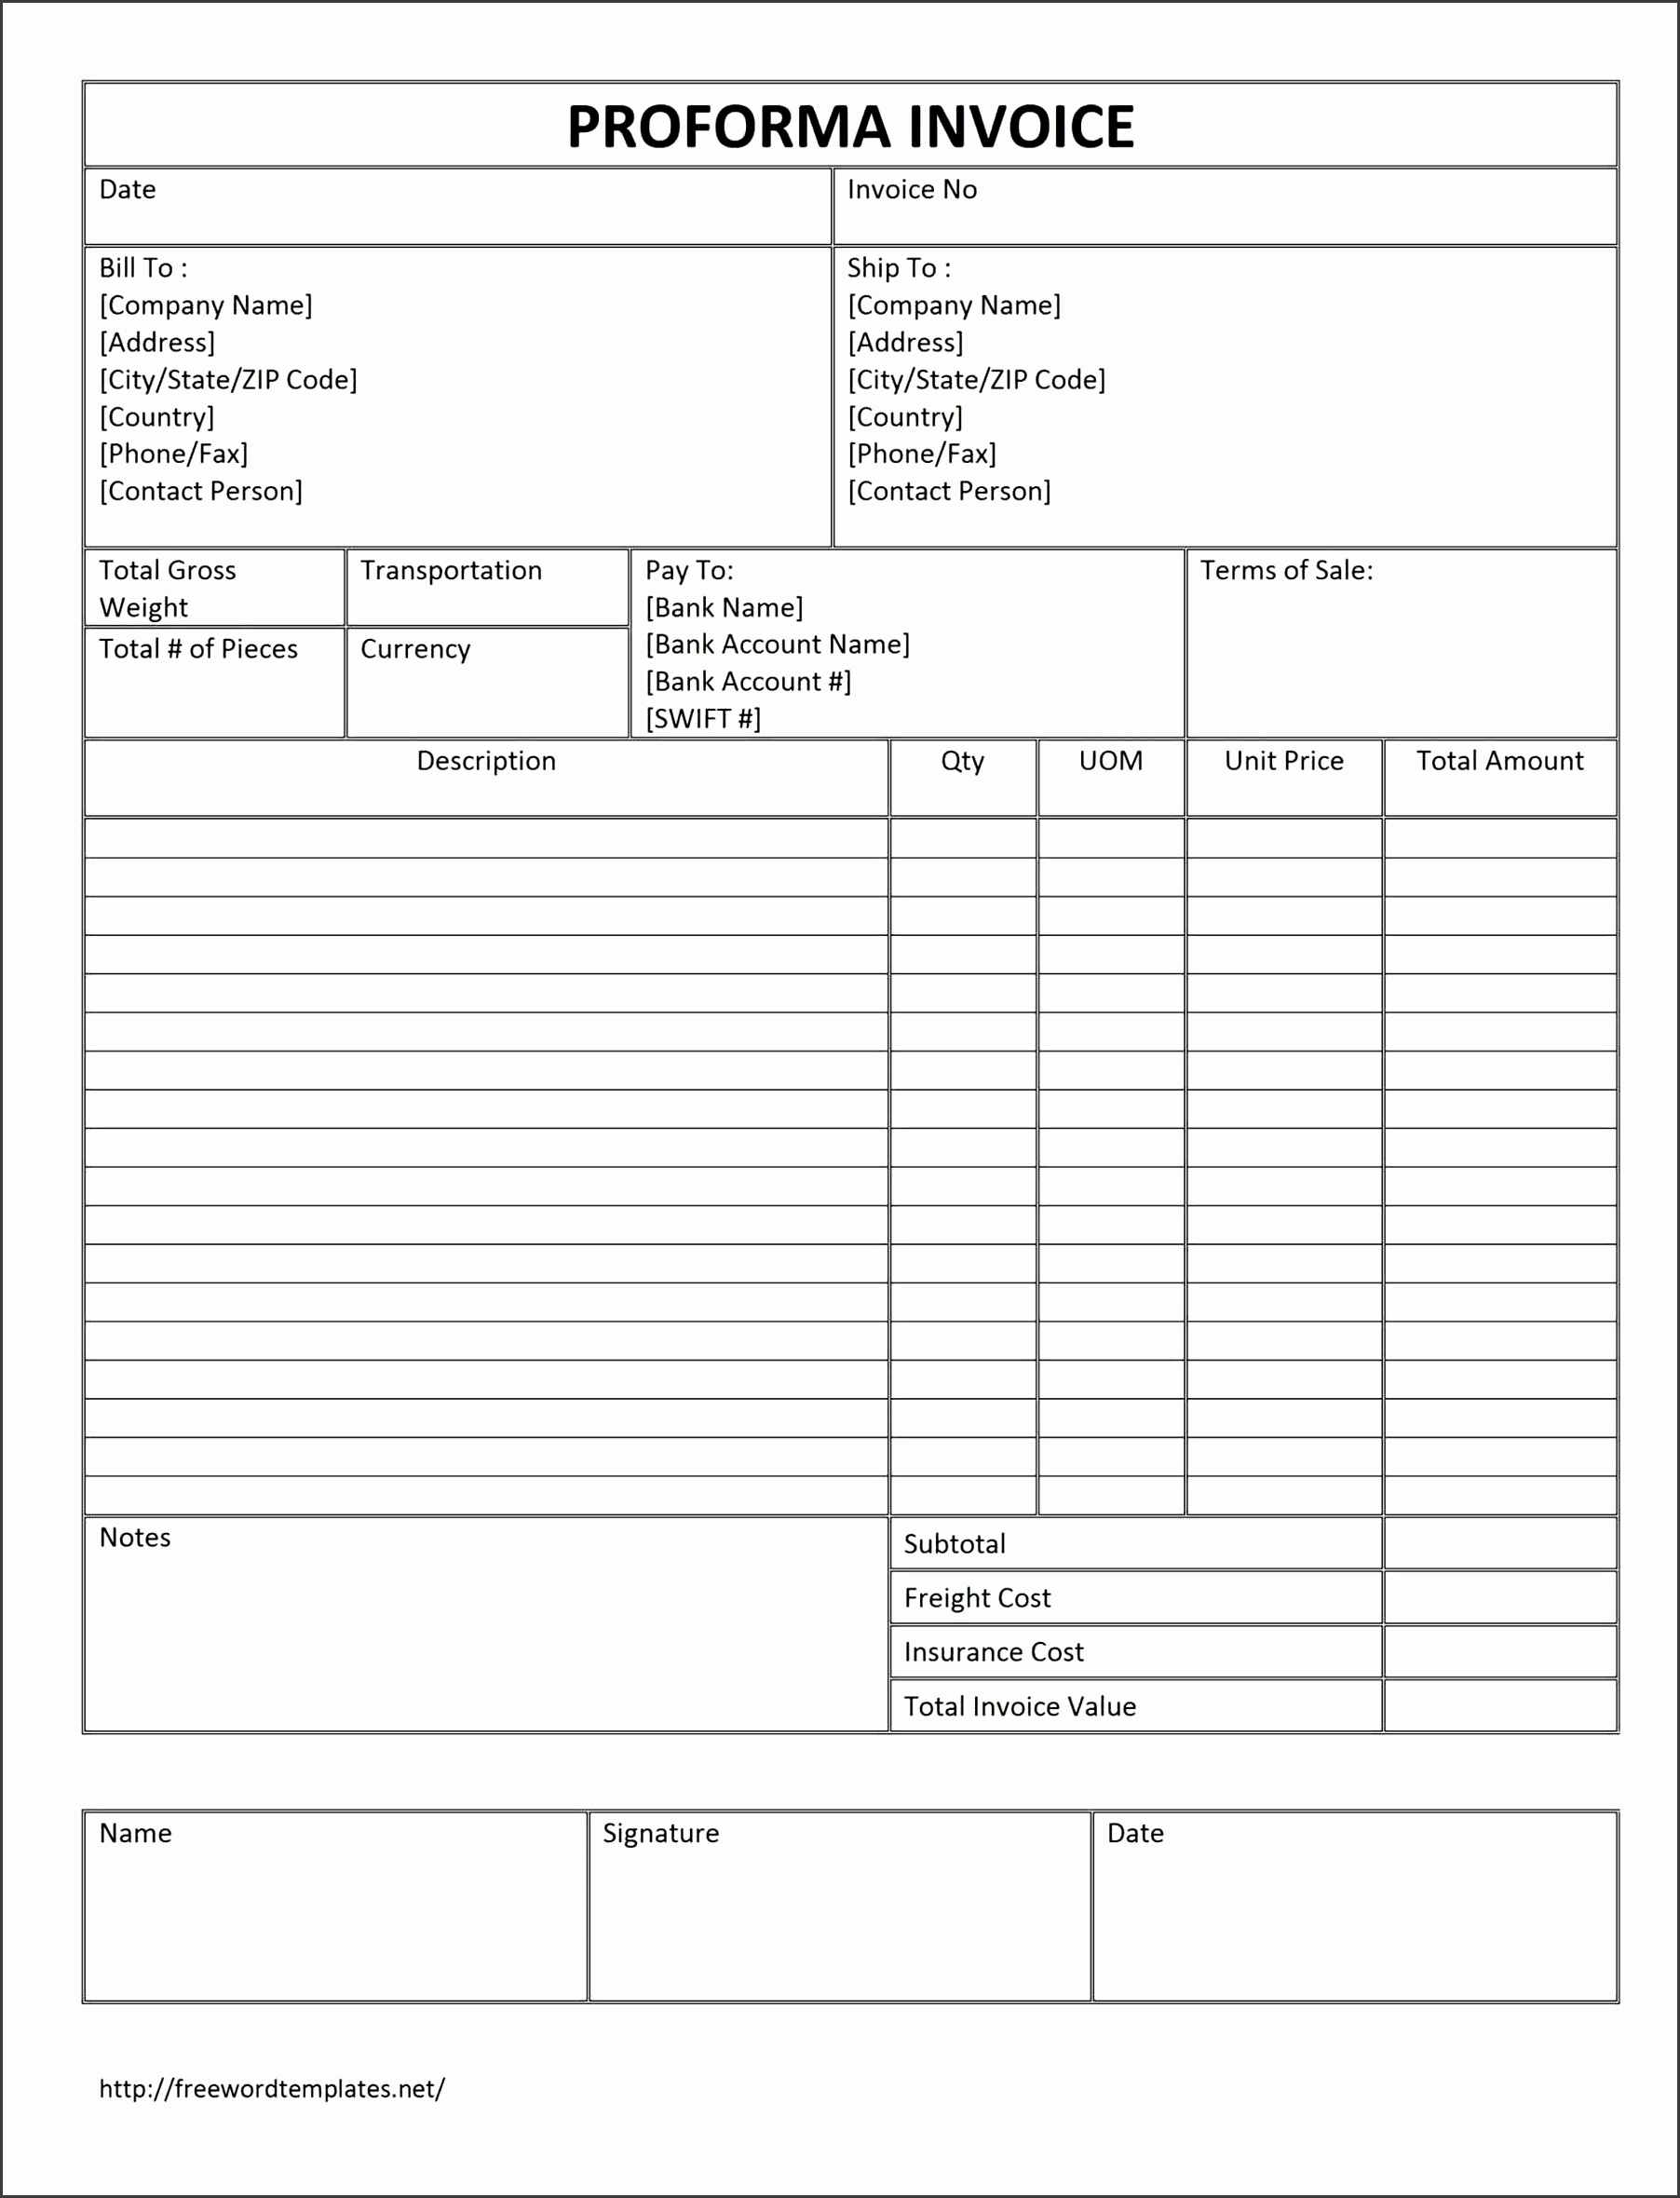 Pleasant Ms Access Resume Database for Your Payroll Template Access Free Printable Resume Templates Word Best